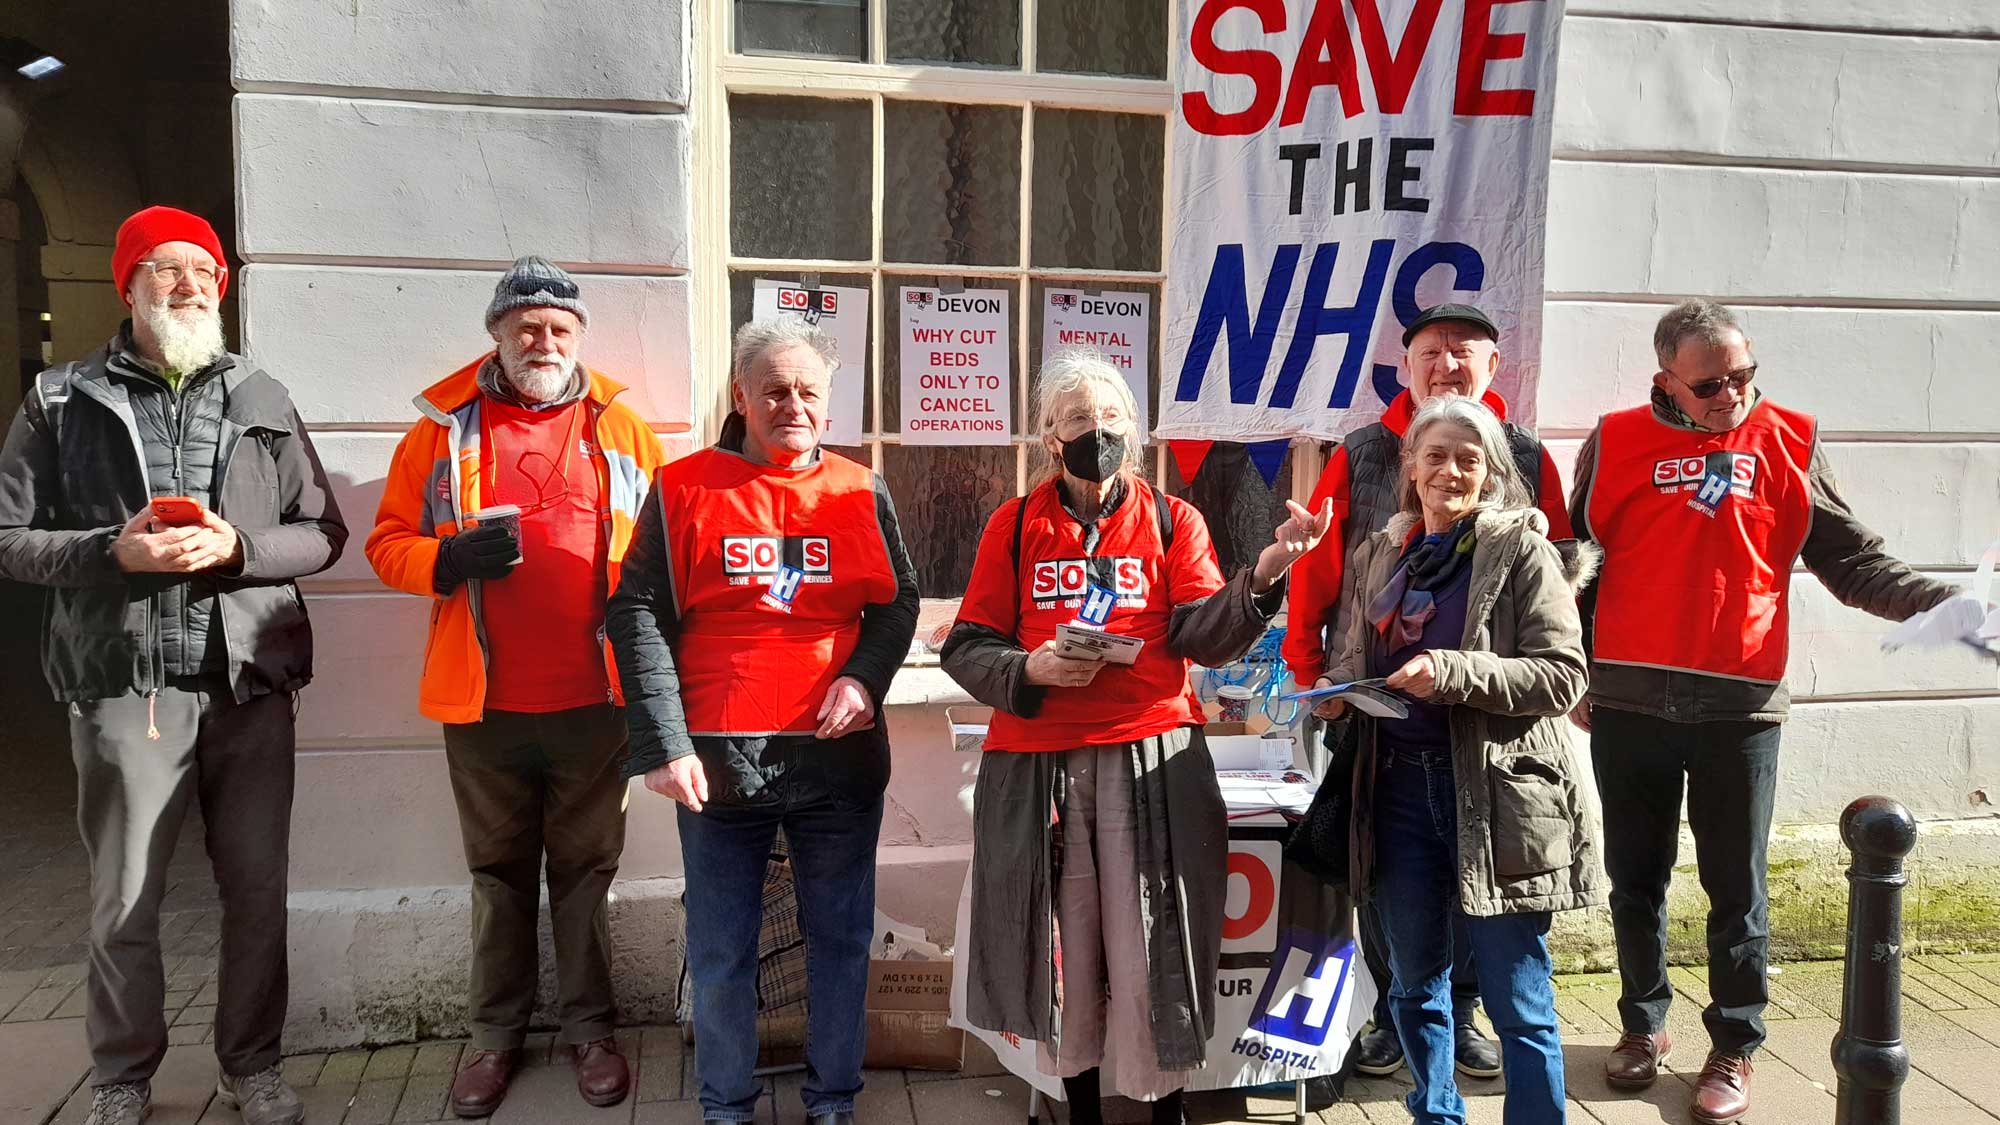 A group of seven campaigners in red SOHS T-shirts stands on a sunny street with a large placard behind them reading Save the NHS